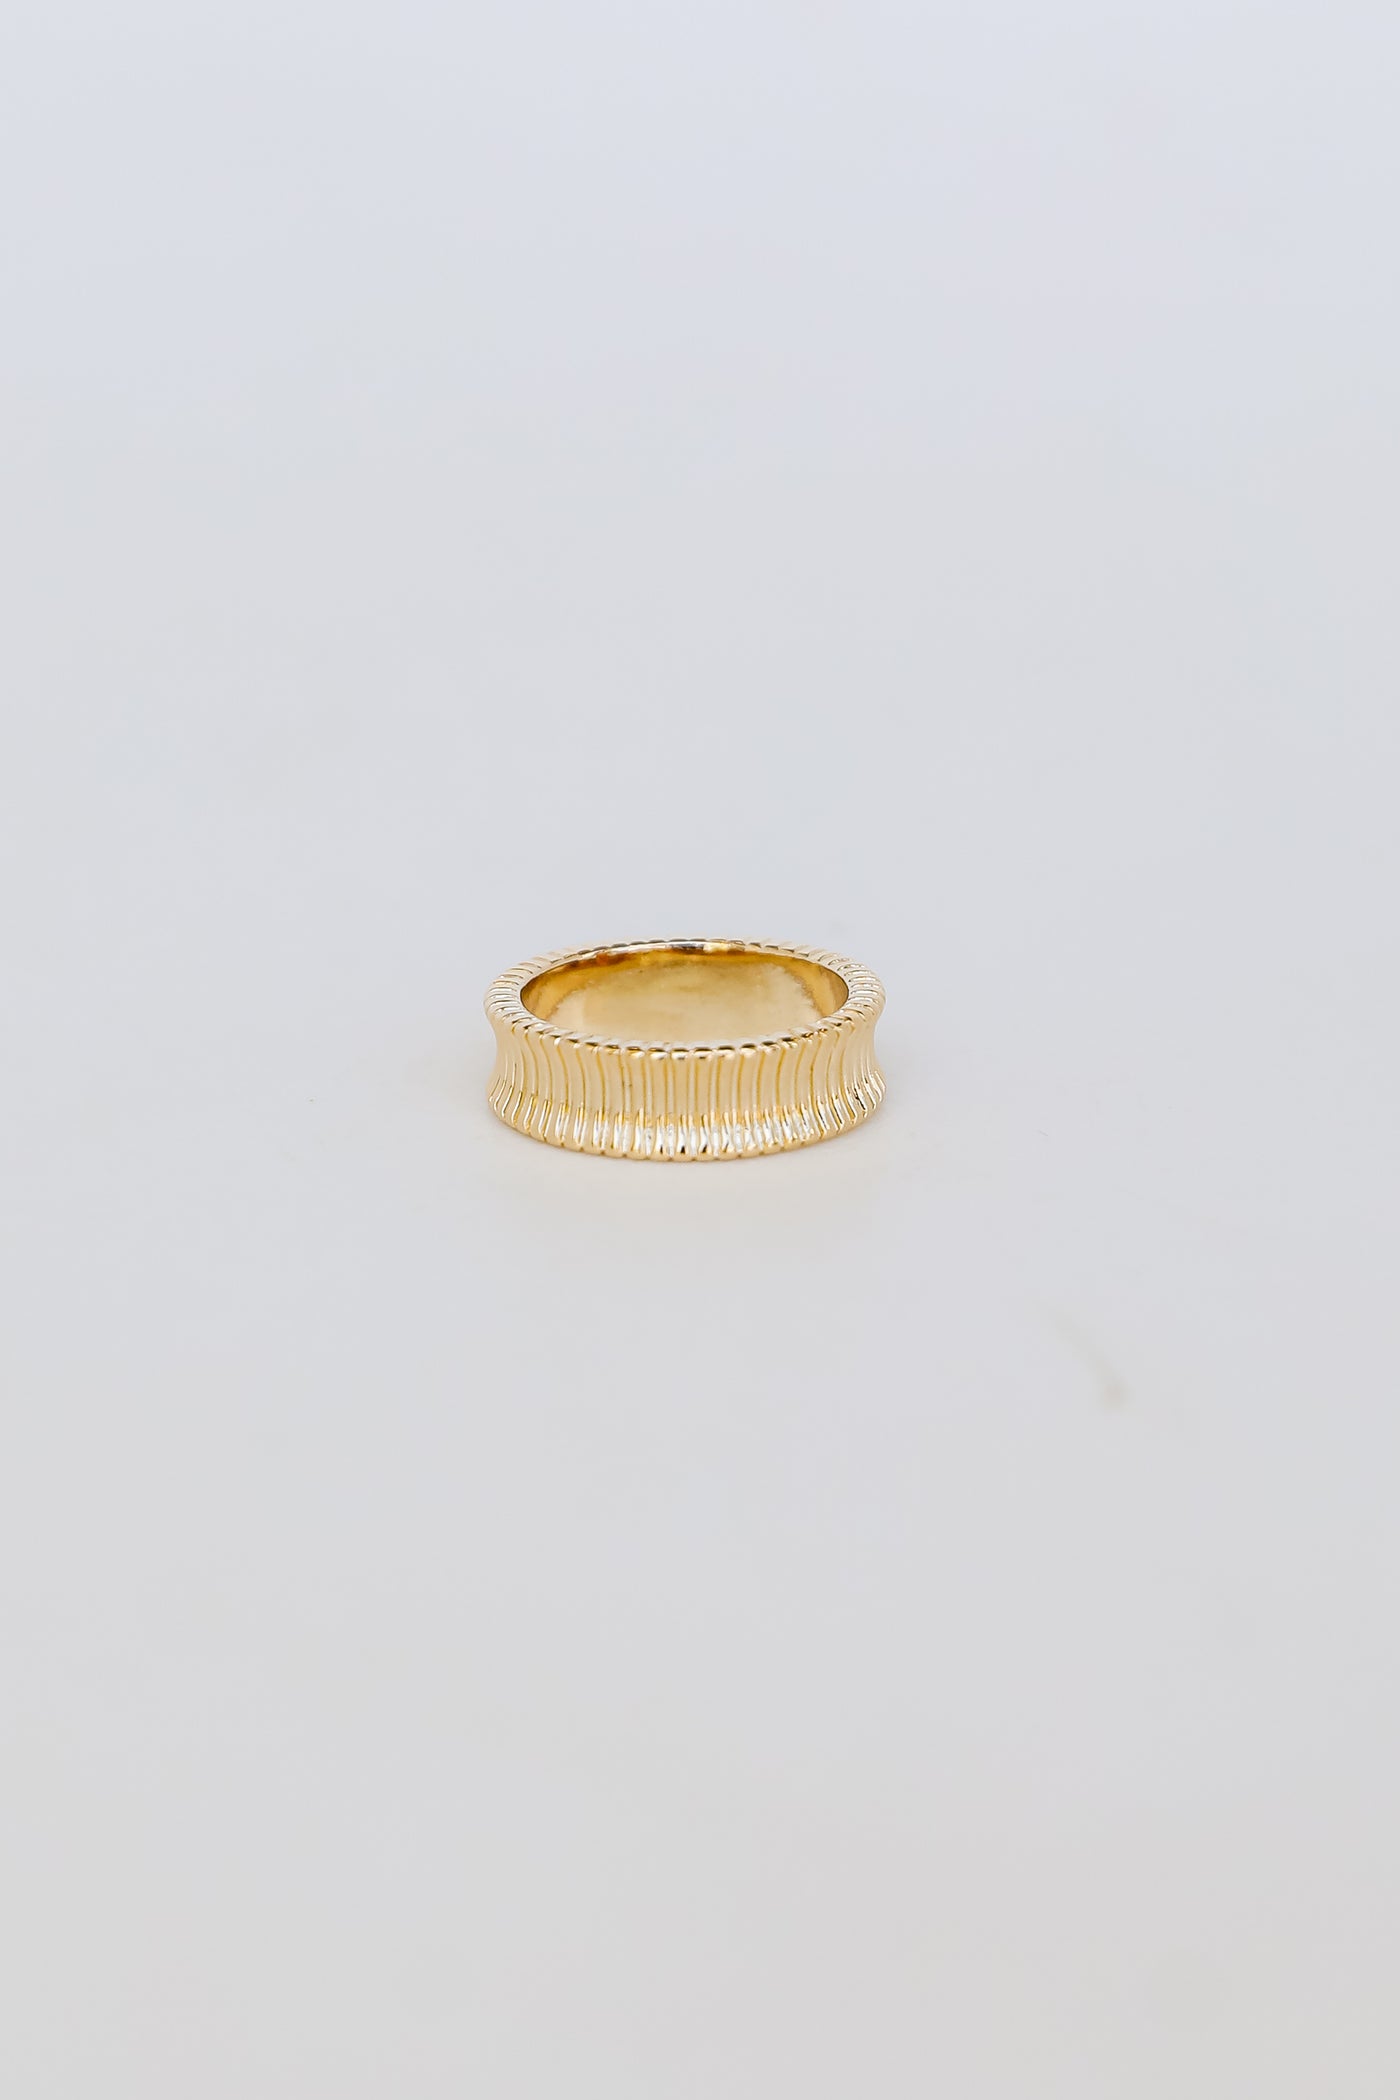 Gold Ring close up